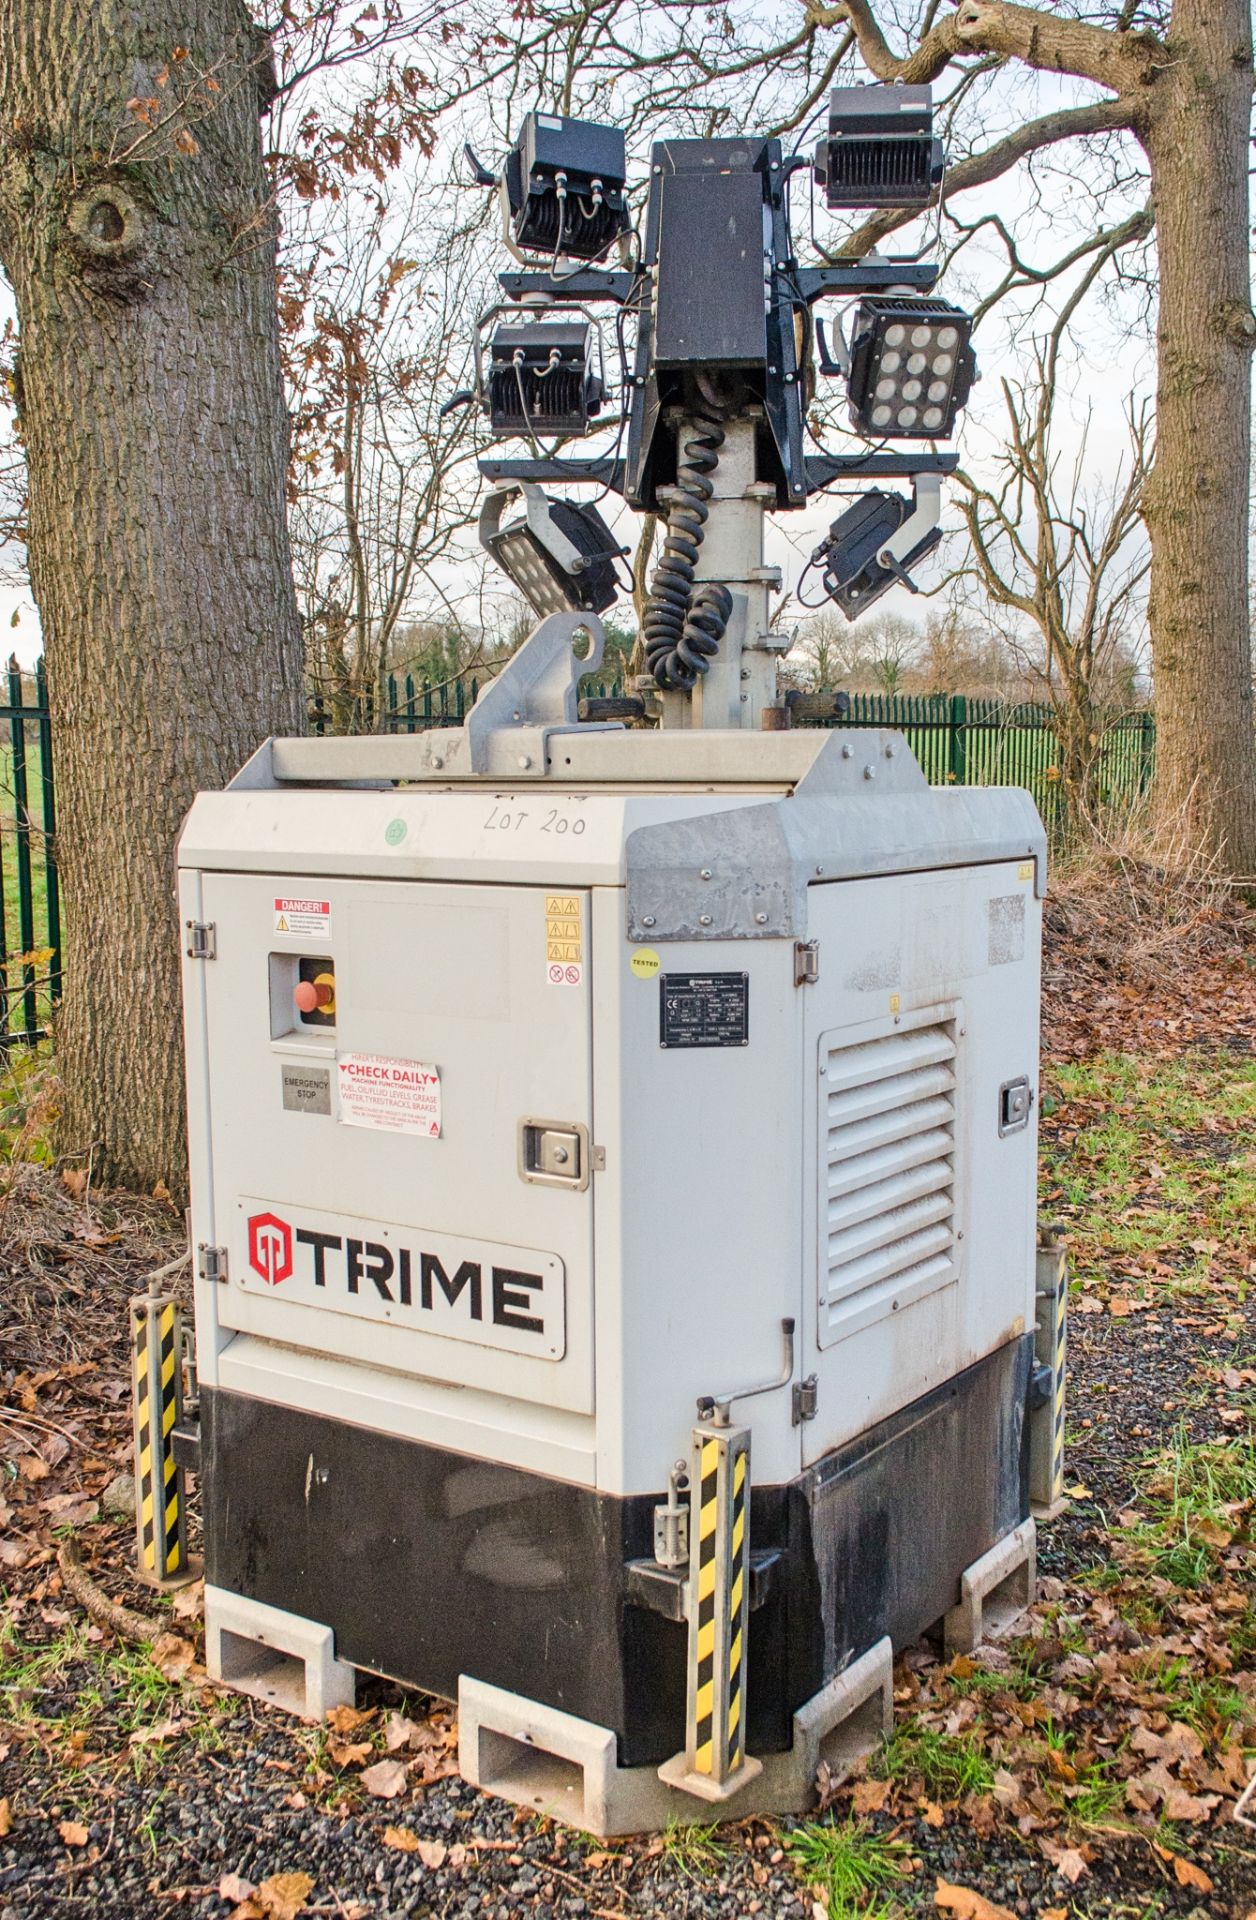 Trime X-Hybrid diesel/hybrid static tower light Year: 2018 S/N: 550180093 Recorded hours: A980559